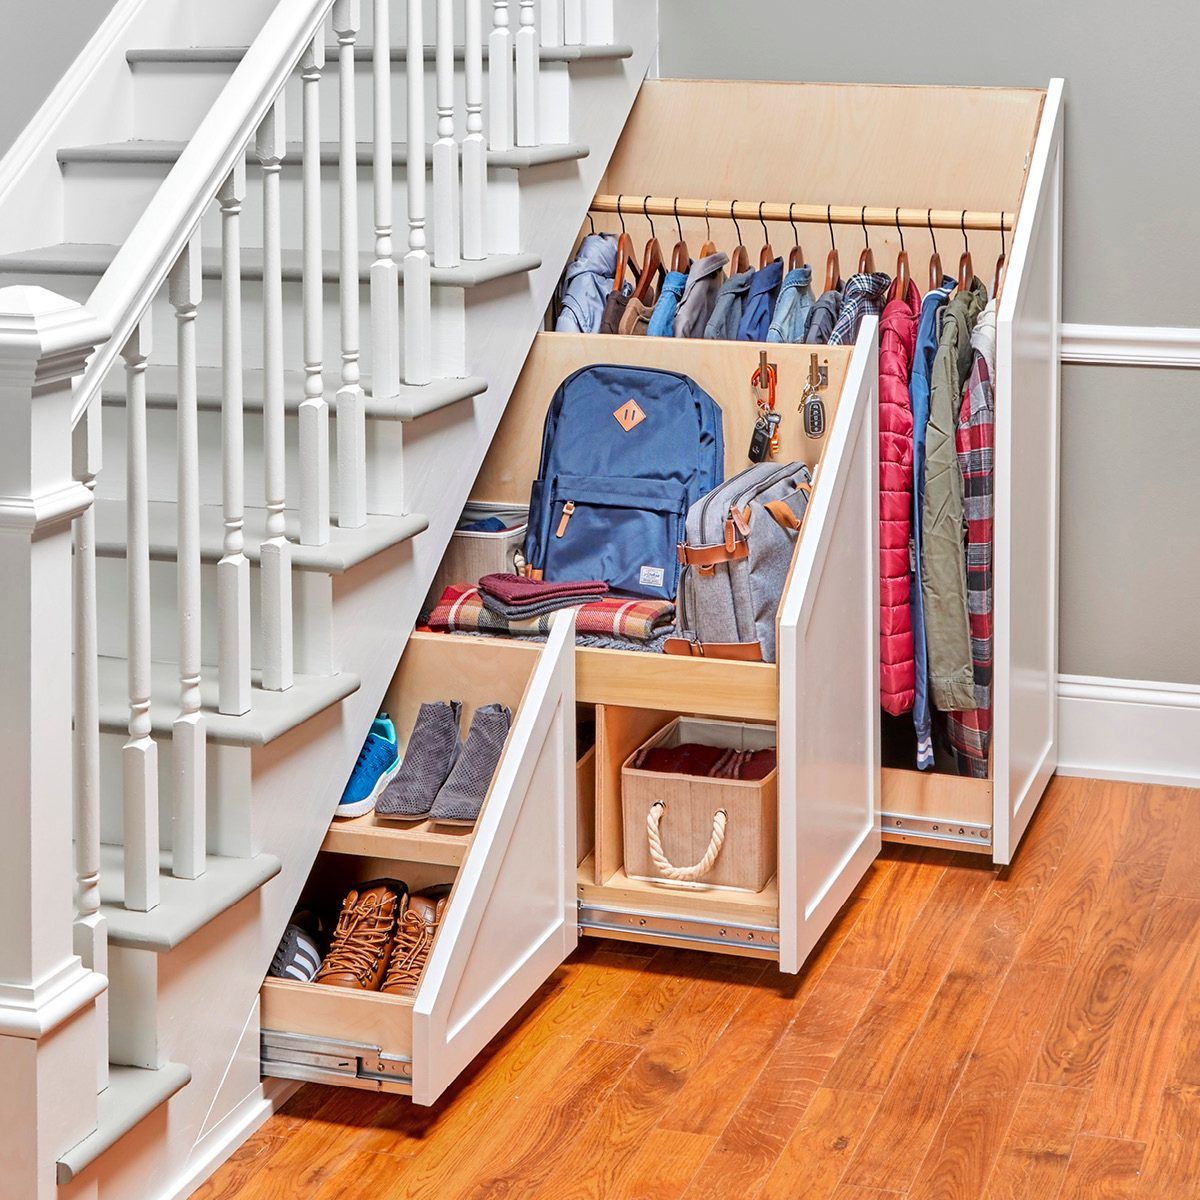 How To Build Storage Under Stairs